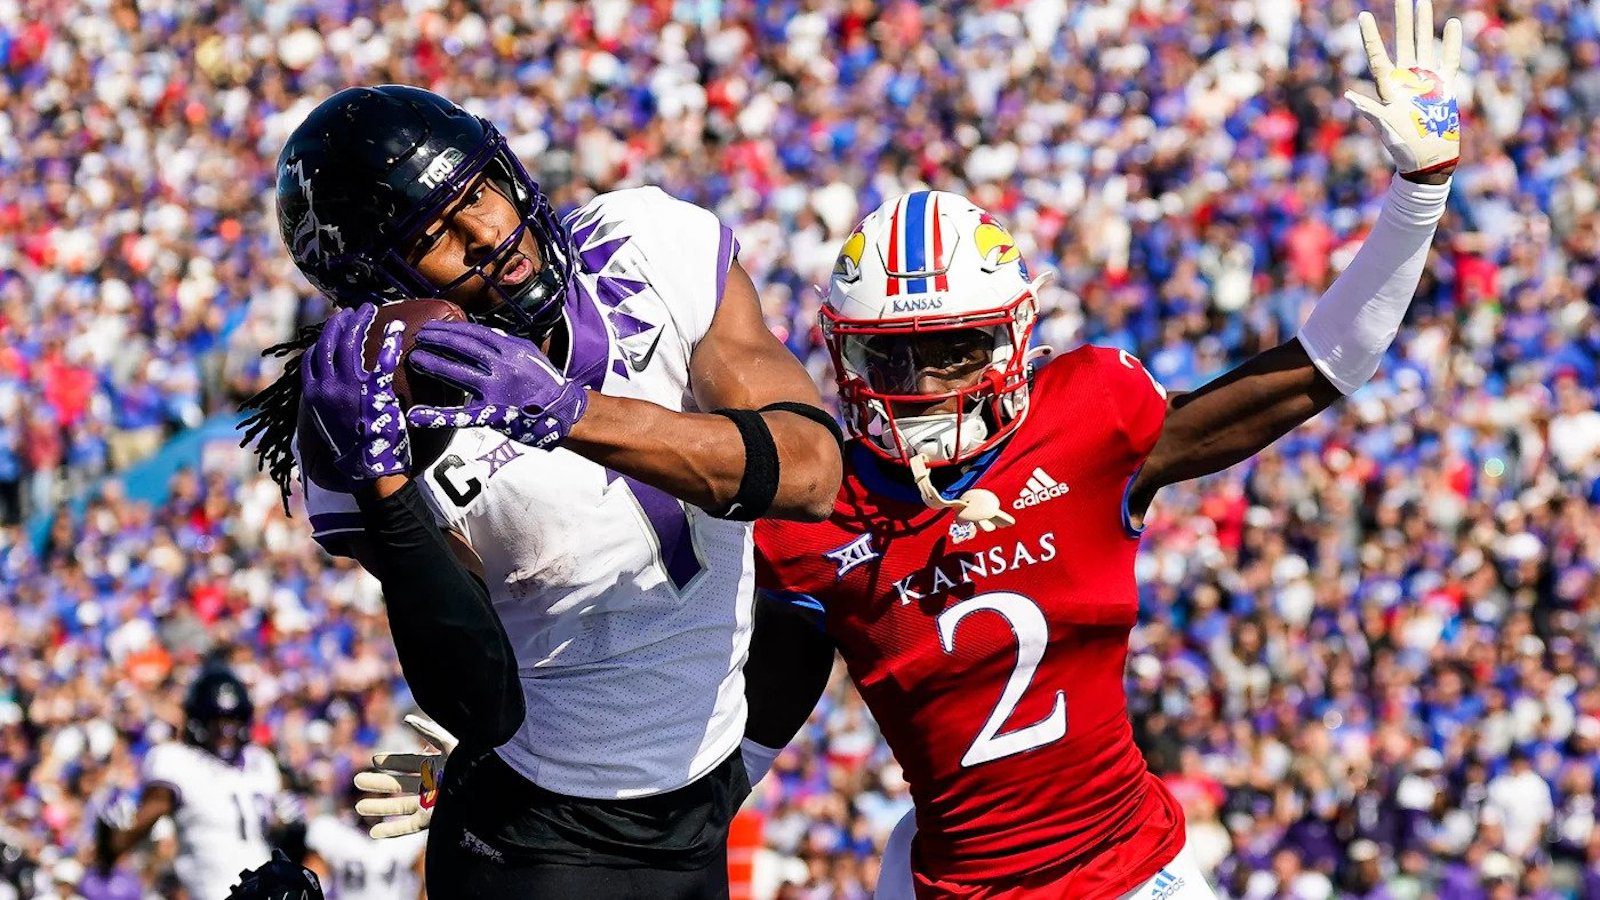 TCU Continues Win Streak with 38-31 Victory at Kansas